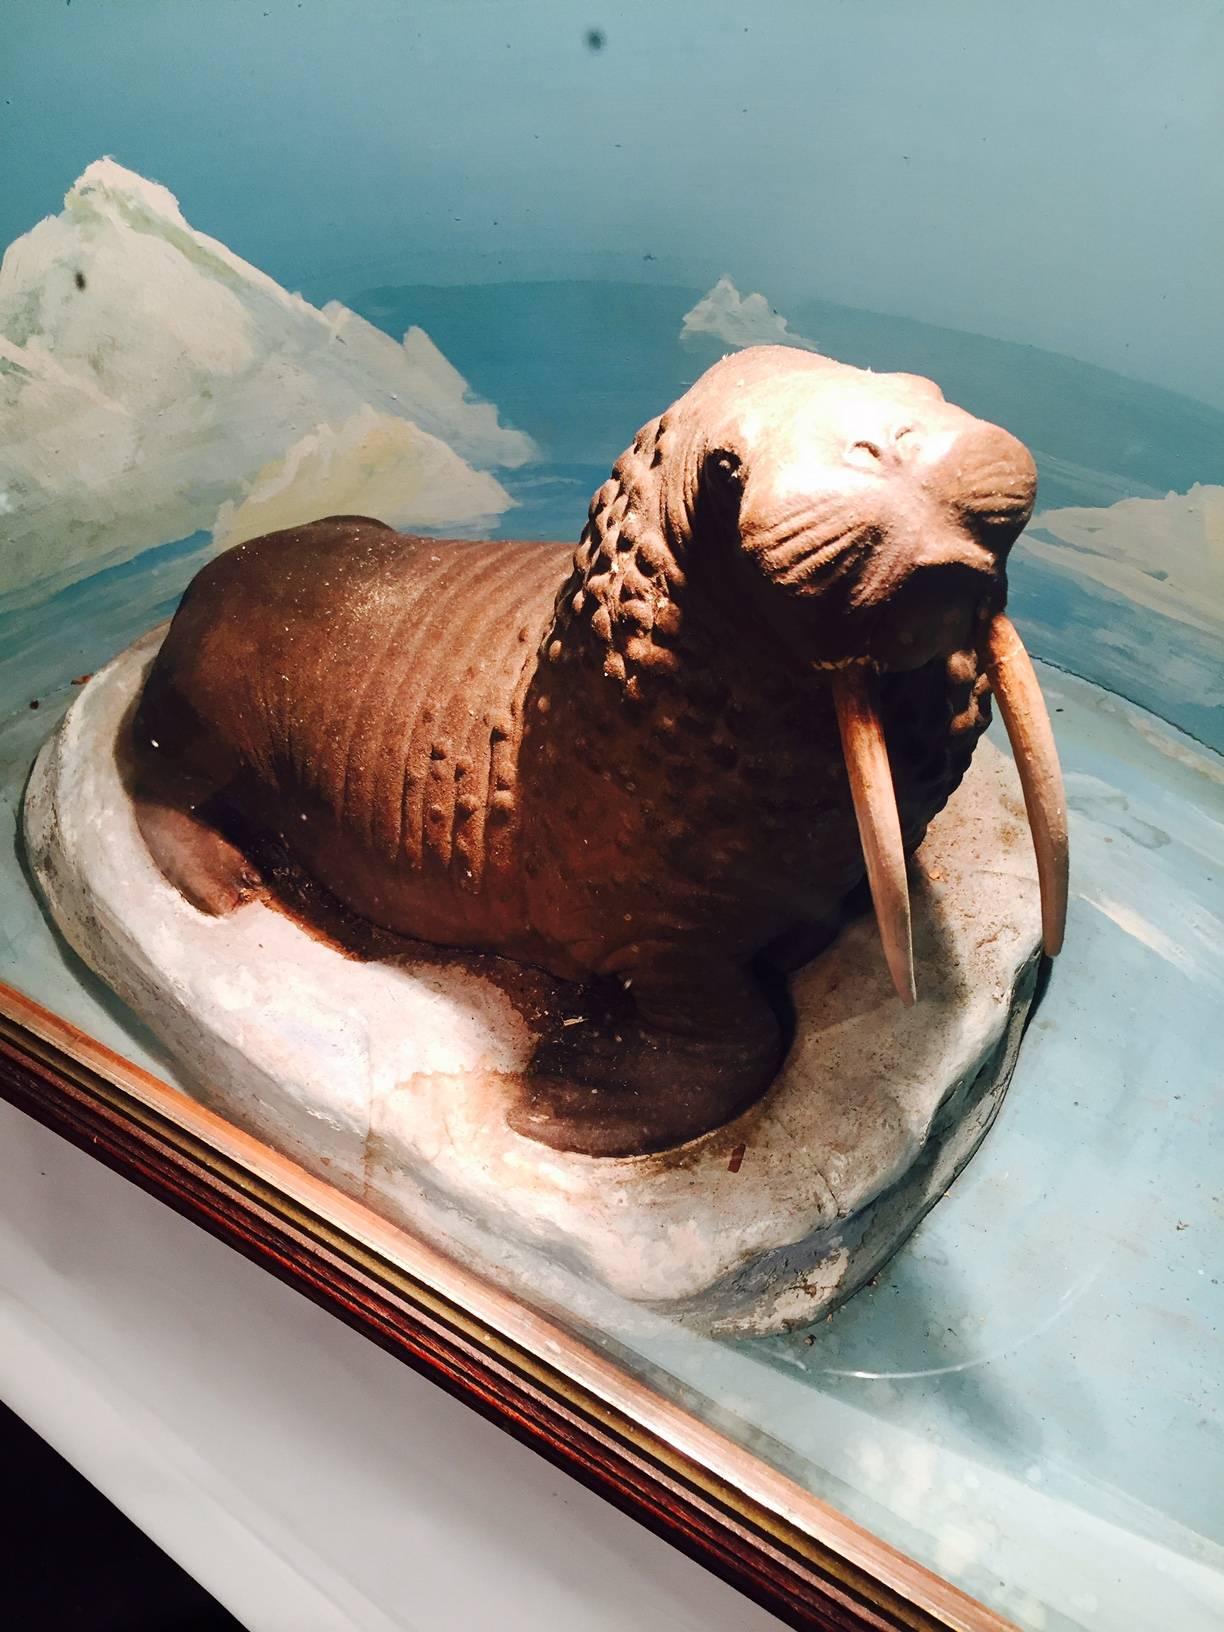 This walrus is made of papier mache and is depicted in his natural environment in a hand-painted diorama, circa 1940s-1950s mounted in a glazed frame. It was de-accessioned from a West Hartford, Connecticut, museum. Dioramas were and continue to be